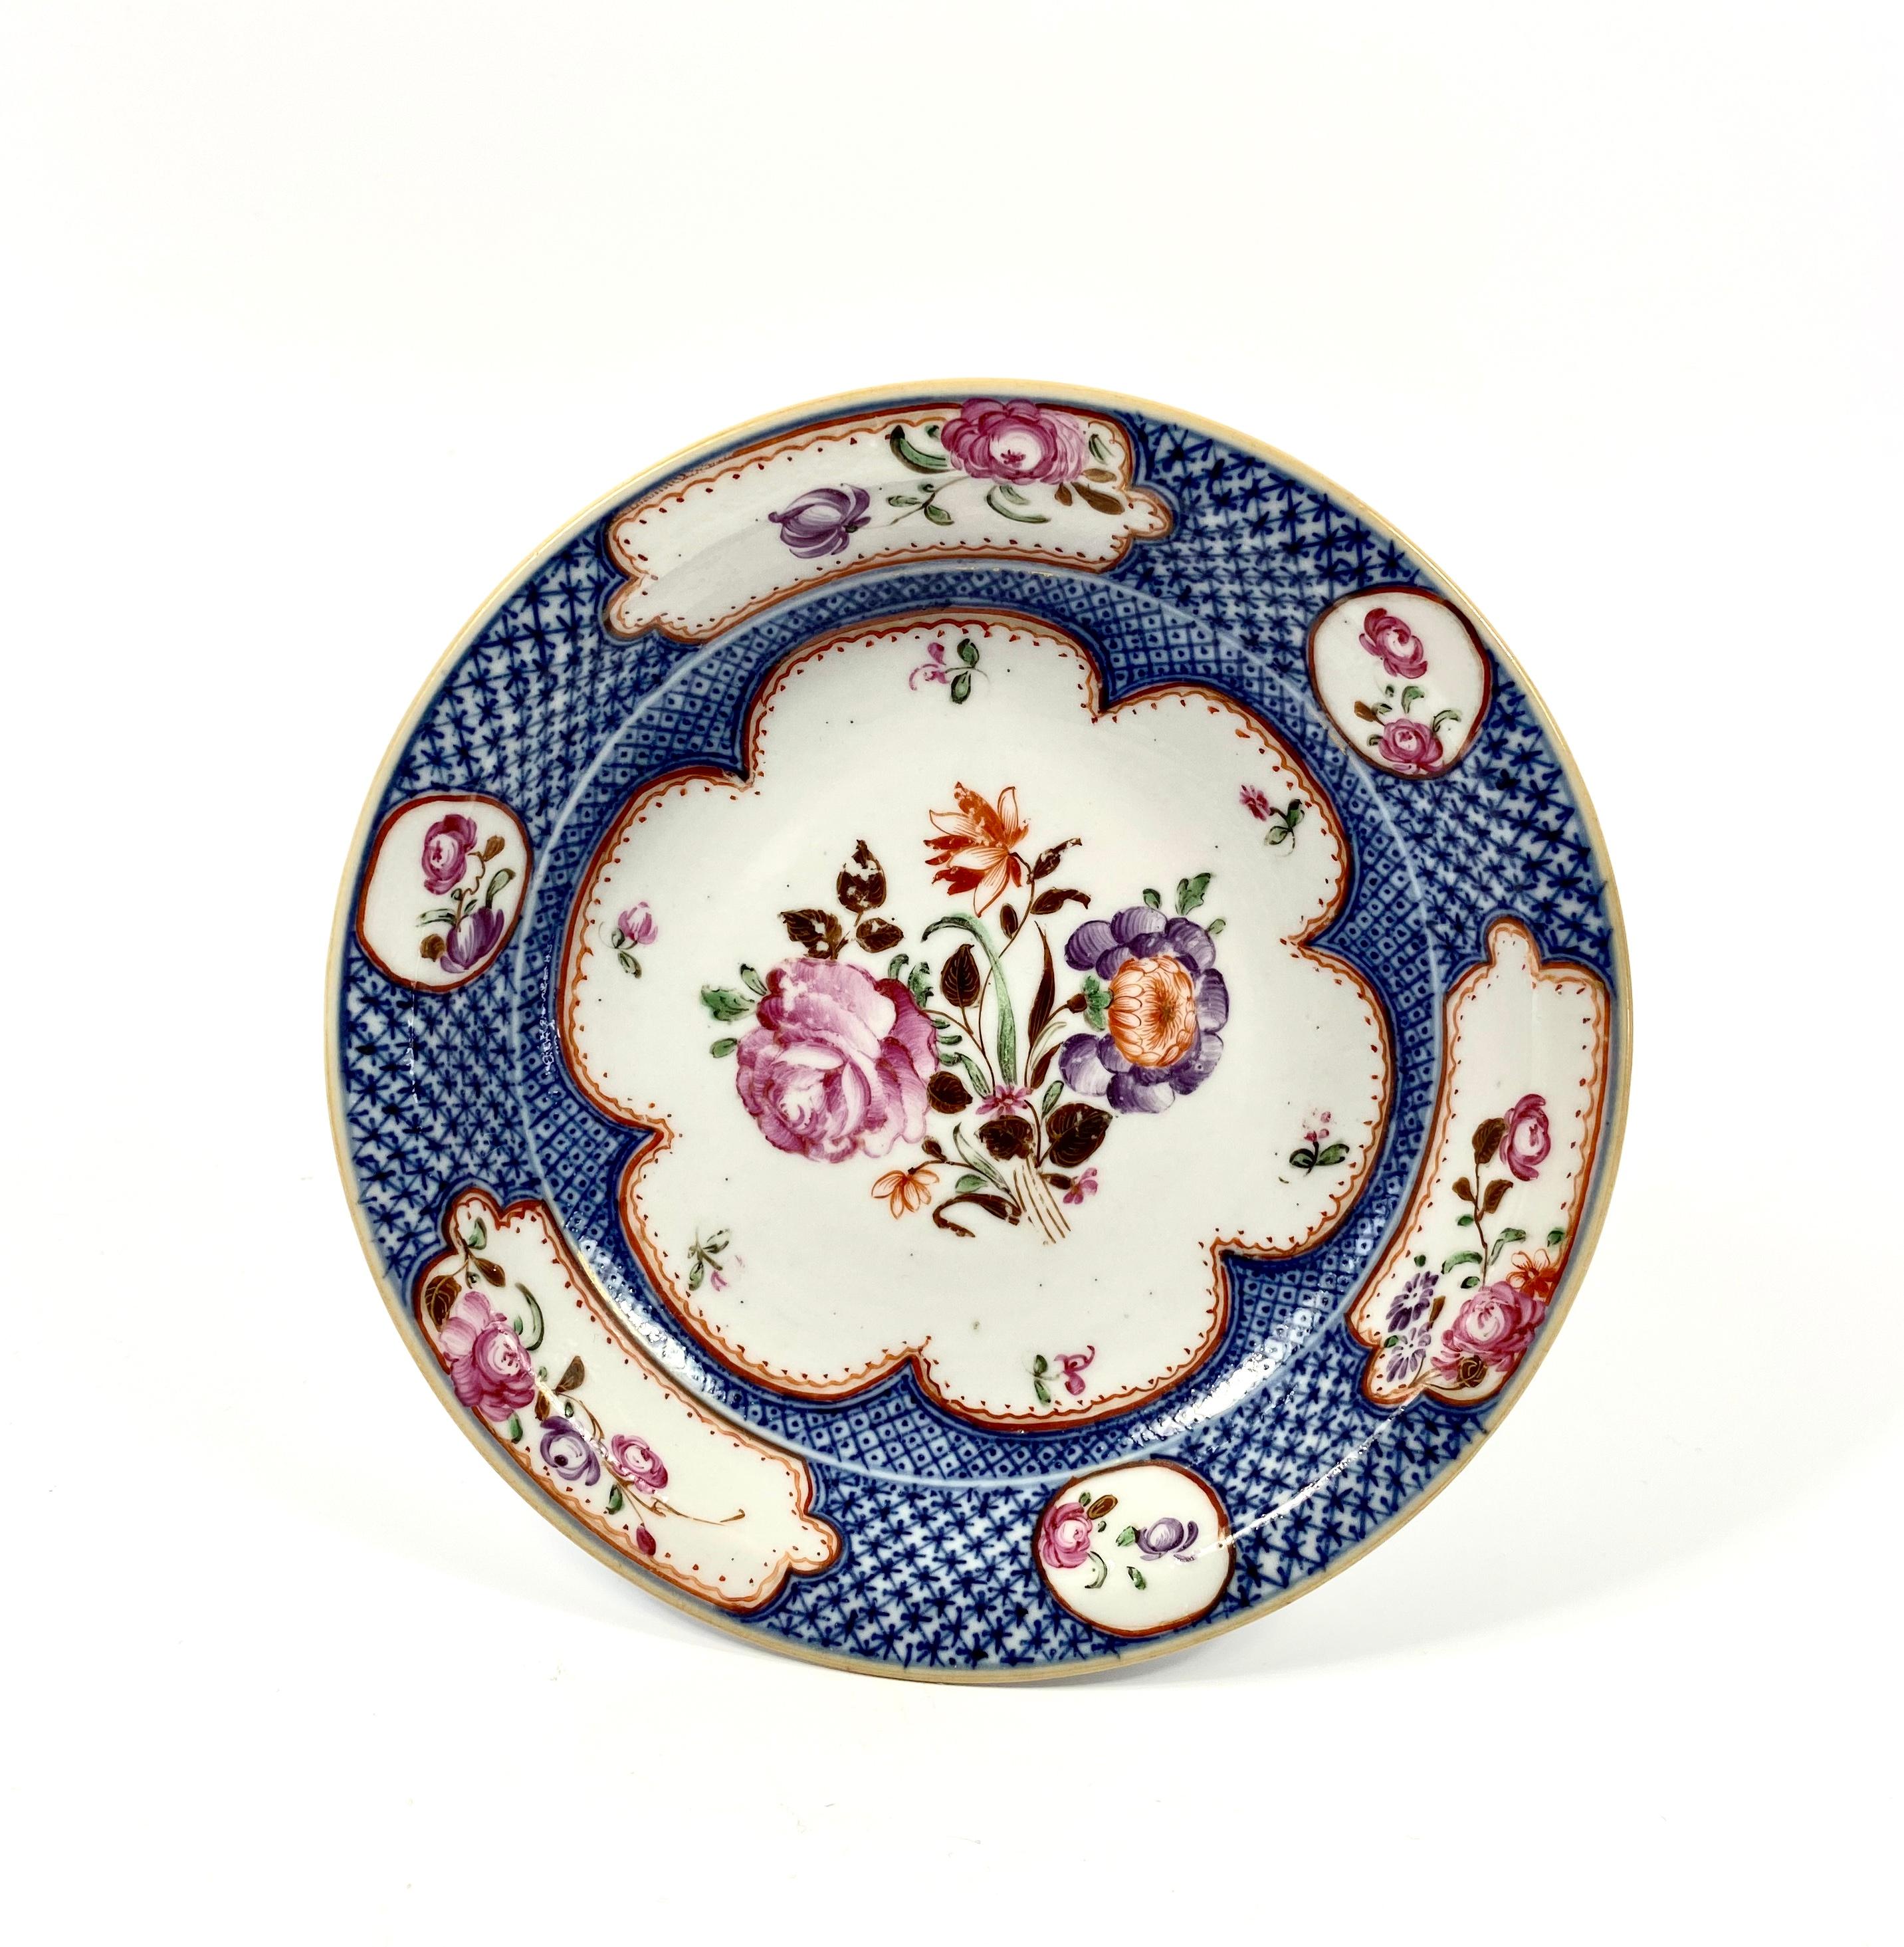 Pair of Chinese porcelain dishes, circa 1760. Qianlong Period. The ‘Compagnie des Indes’ style dishes, painted in fencai or famille rose enamels, with sprays of flowers, within a large petal shaped panel, within an underglaze blue cell diaper